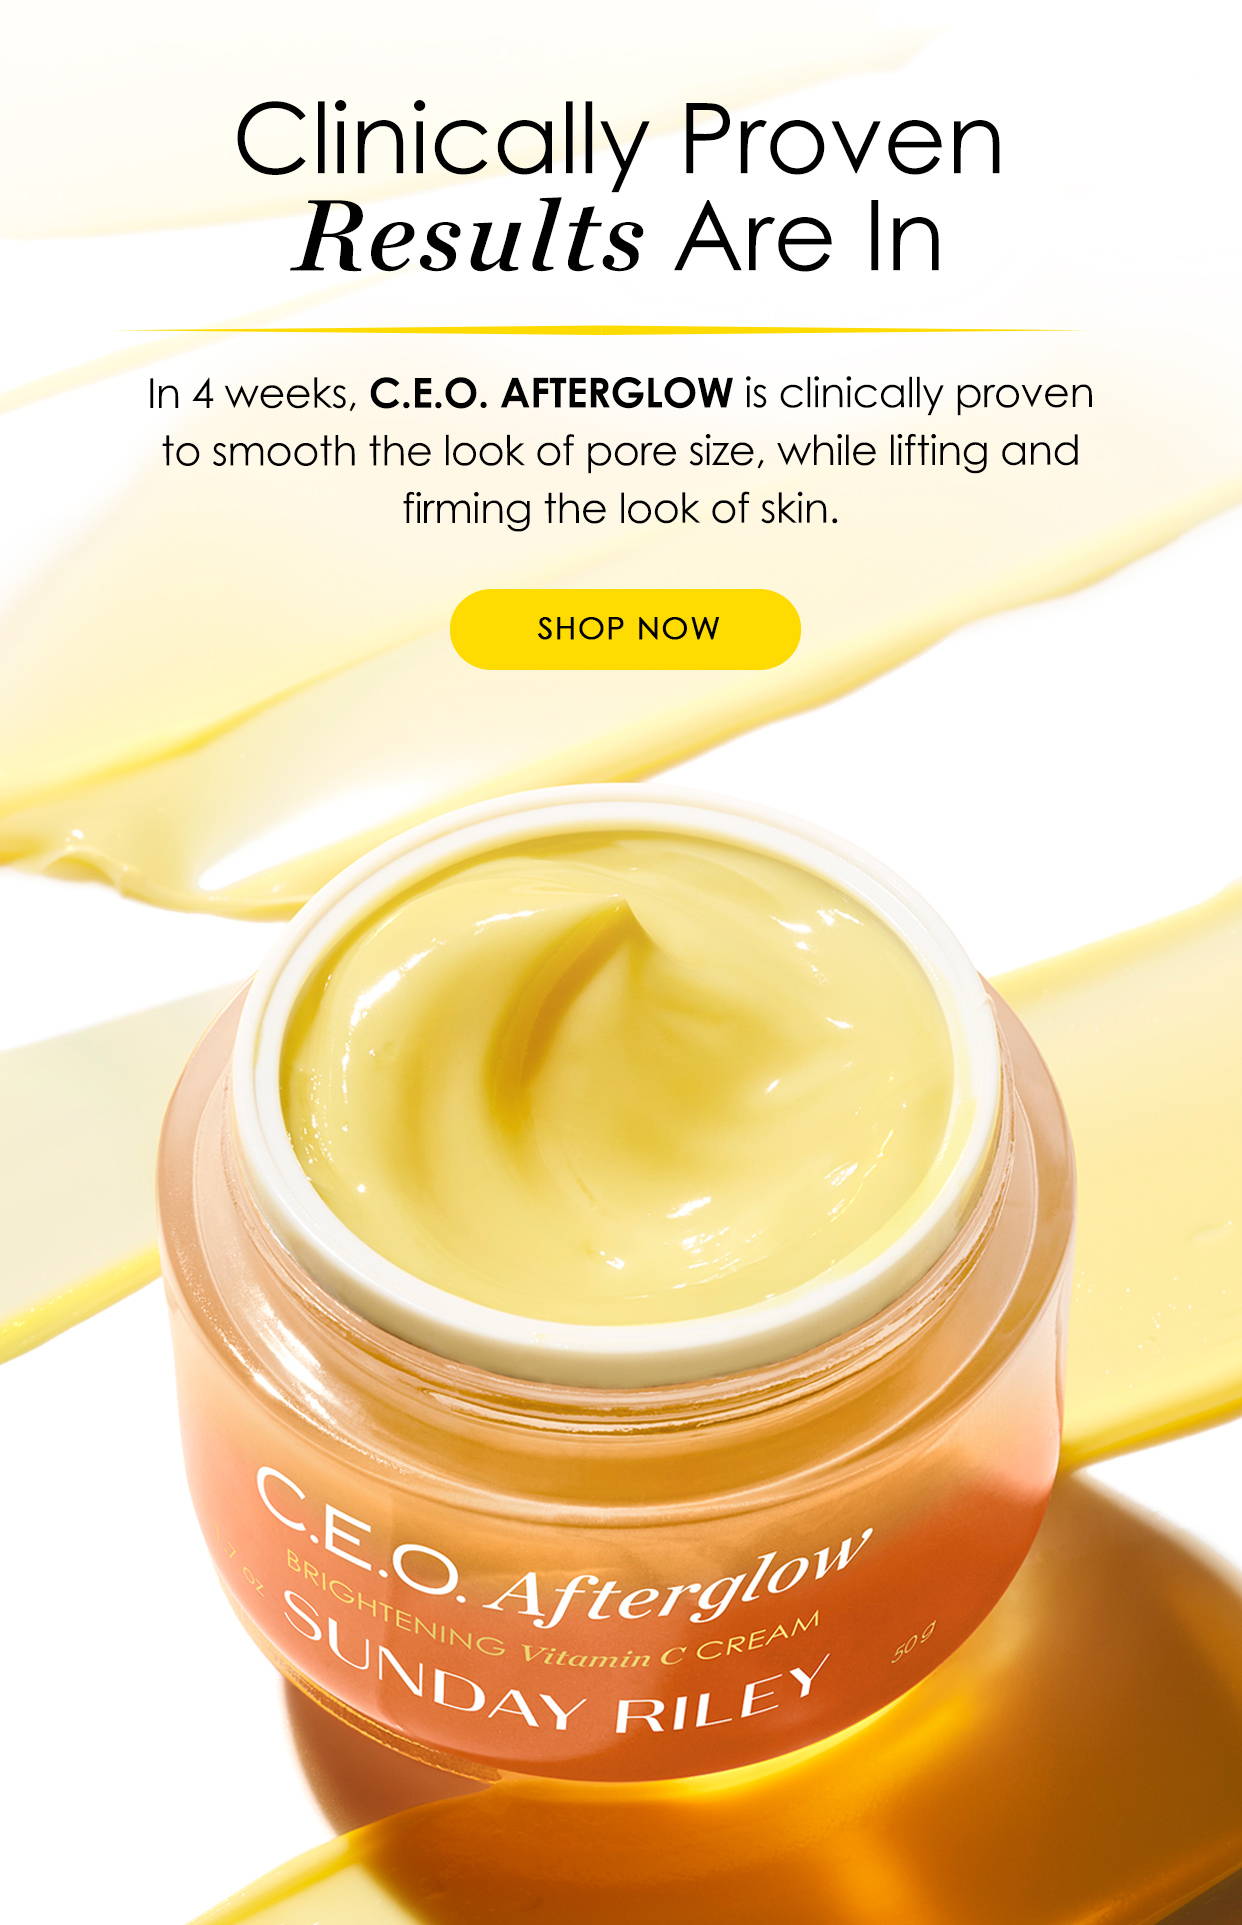 banner image of afterglow with copy stating that in 4 weeks, ceo afterglow is clinically proven to smooth the look of pore size, while lifting and firming the look of skin.